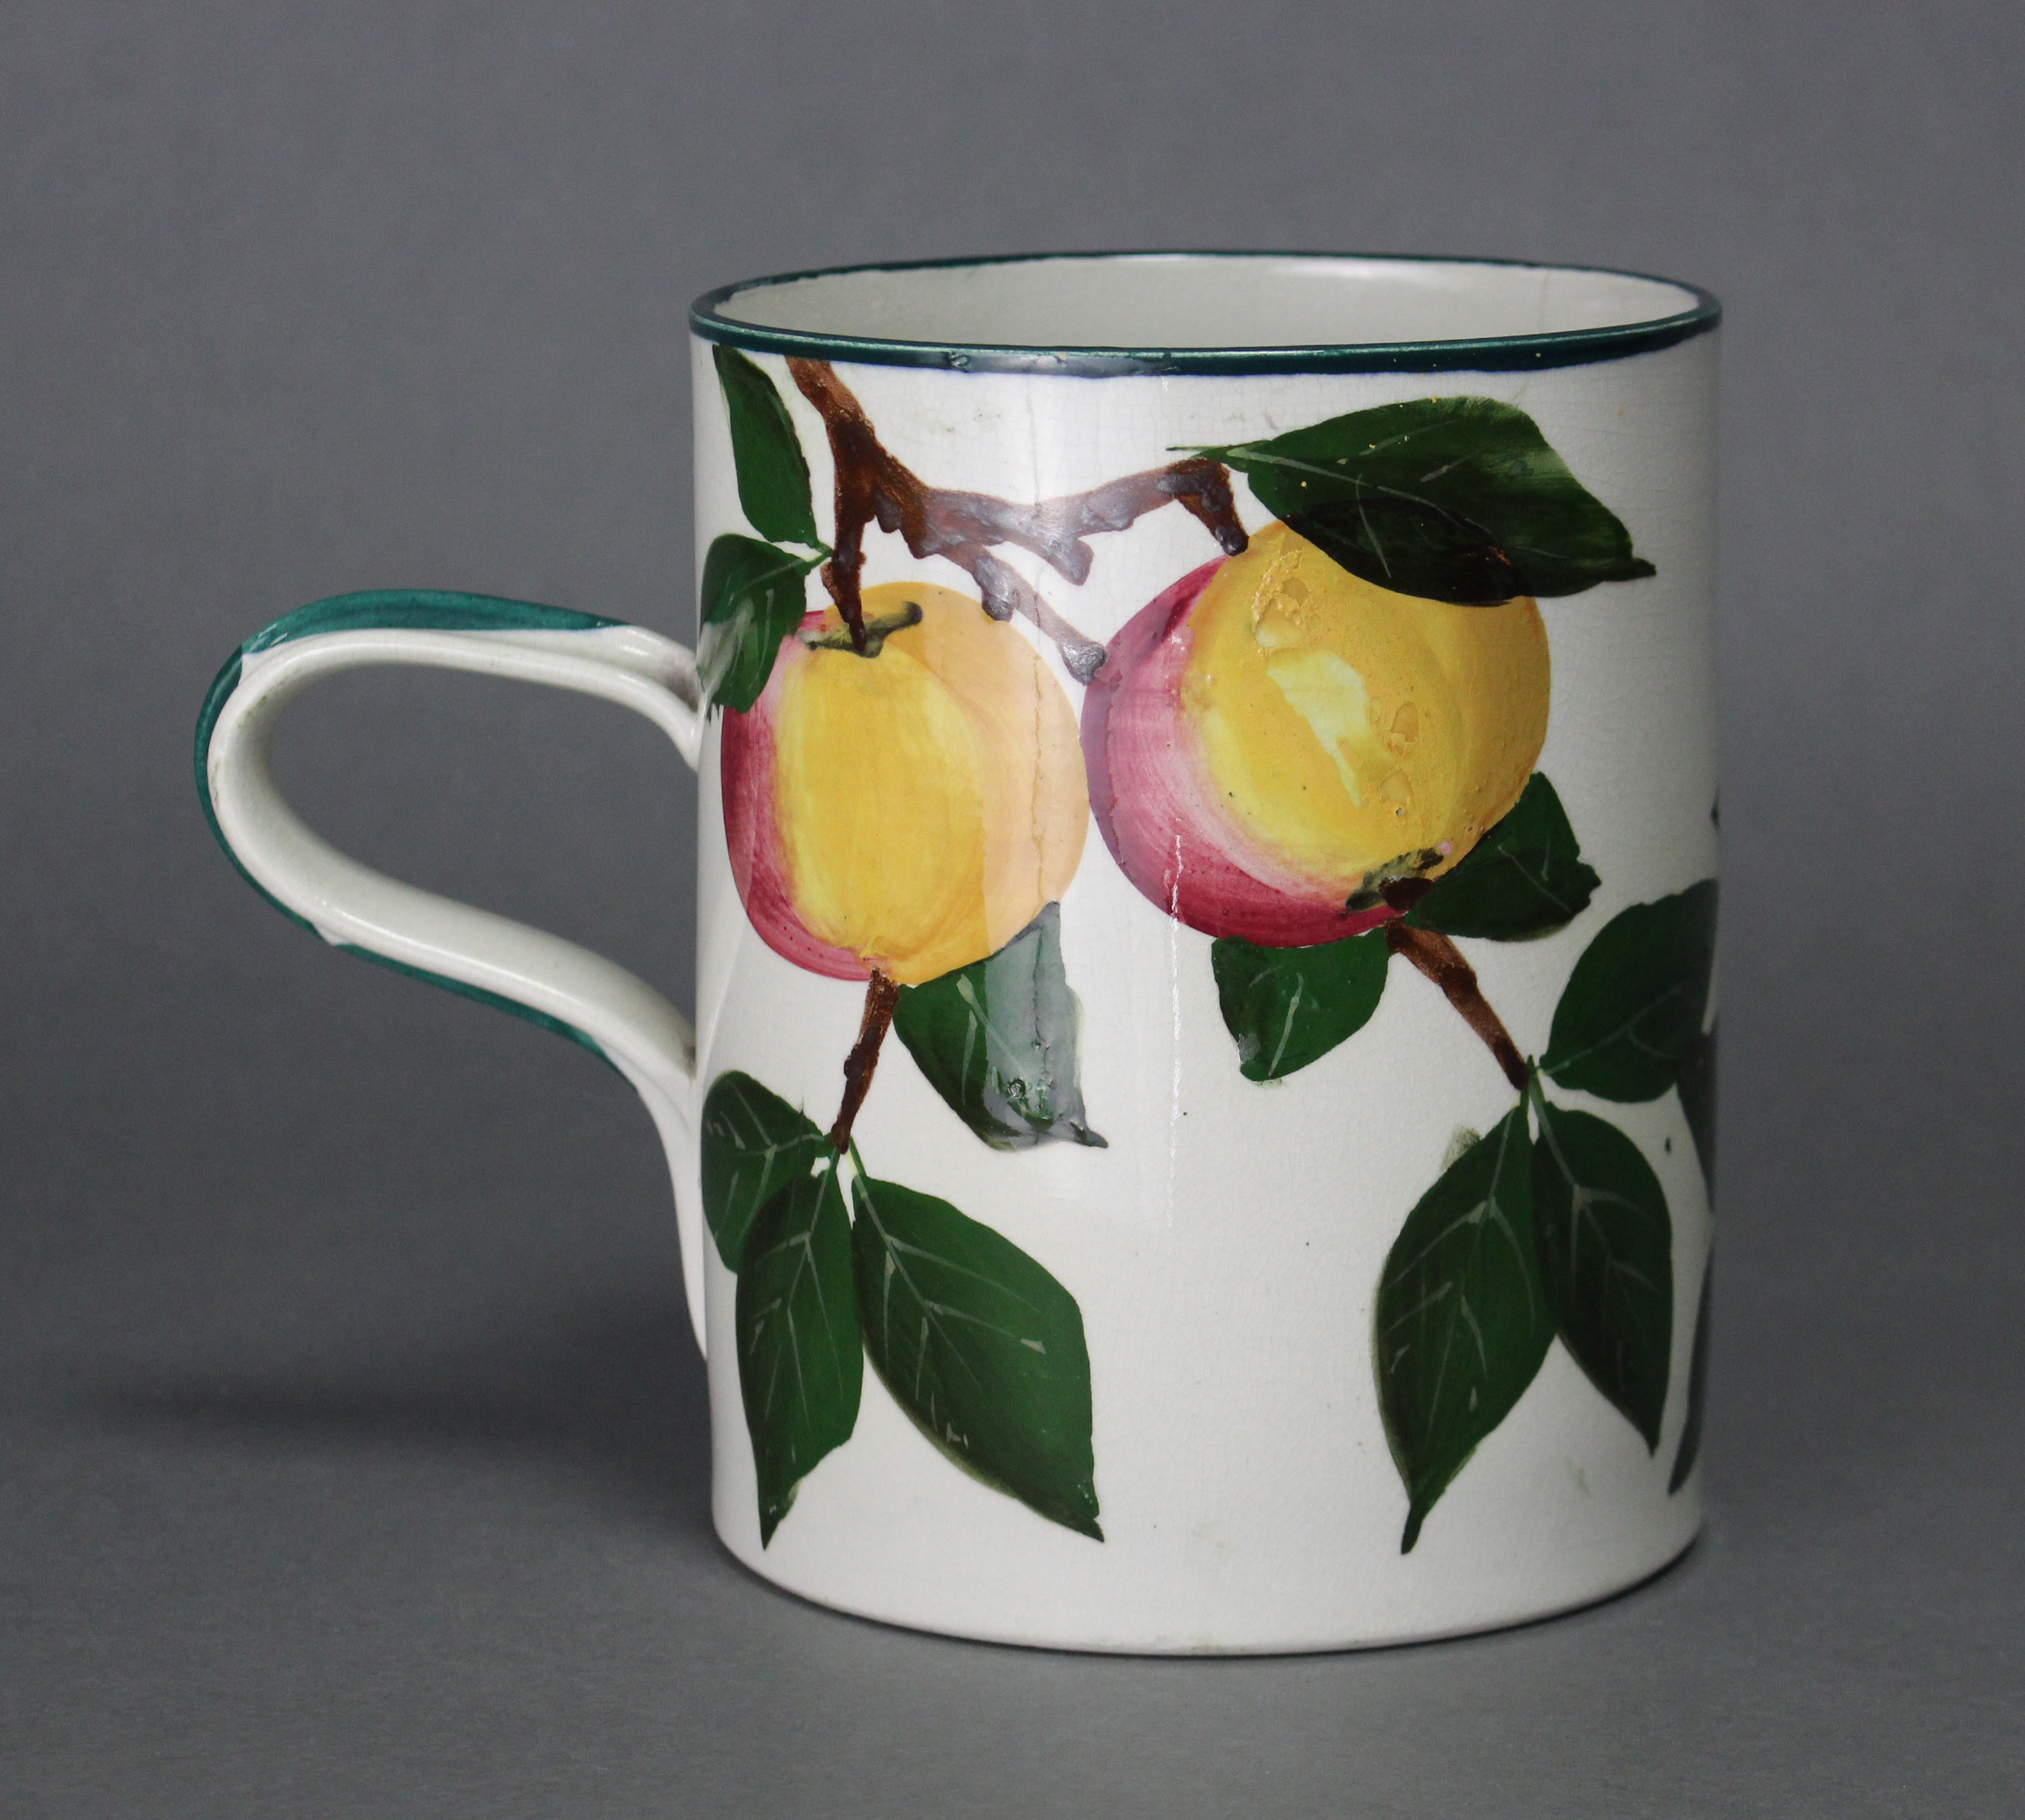 A Wemyss Ware (R. Heron & Son) pottery large cylindrical mug painted with the “Apples” pattern; - Image 2 of 8